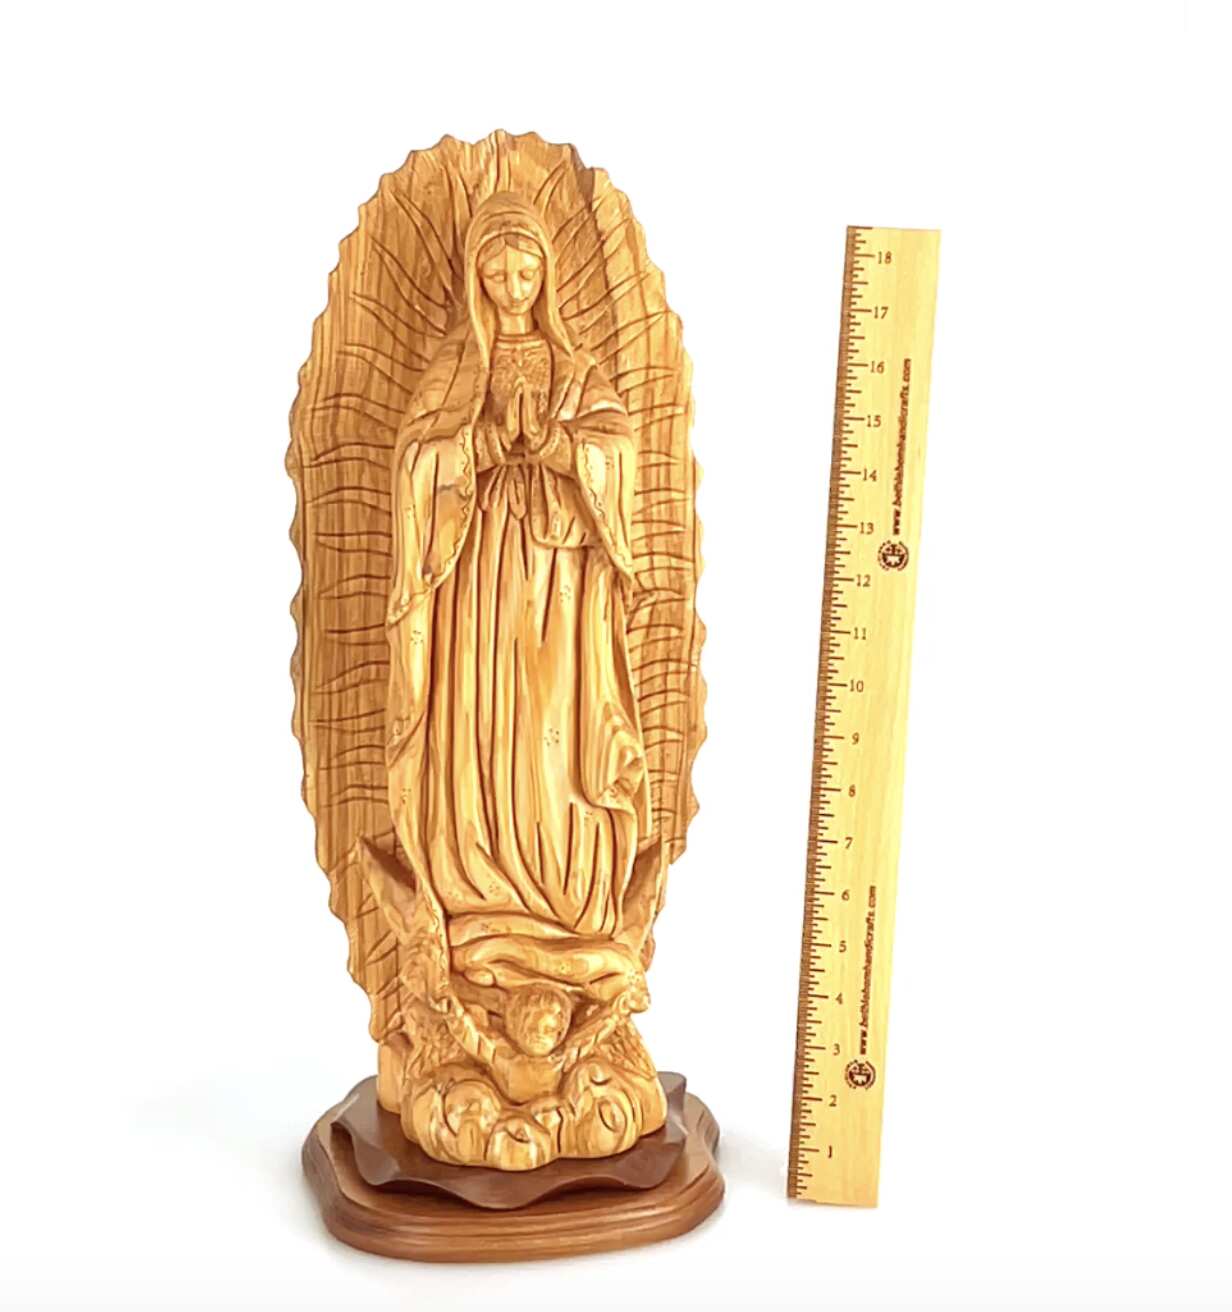 Virgin Mary “Our Lady of Guadalupe” Statue, 20.7" Carving from Holy Land Olive Wood